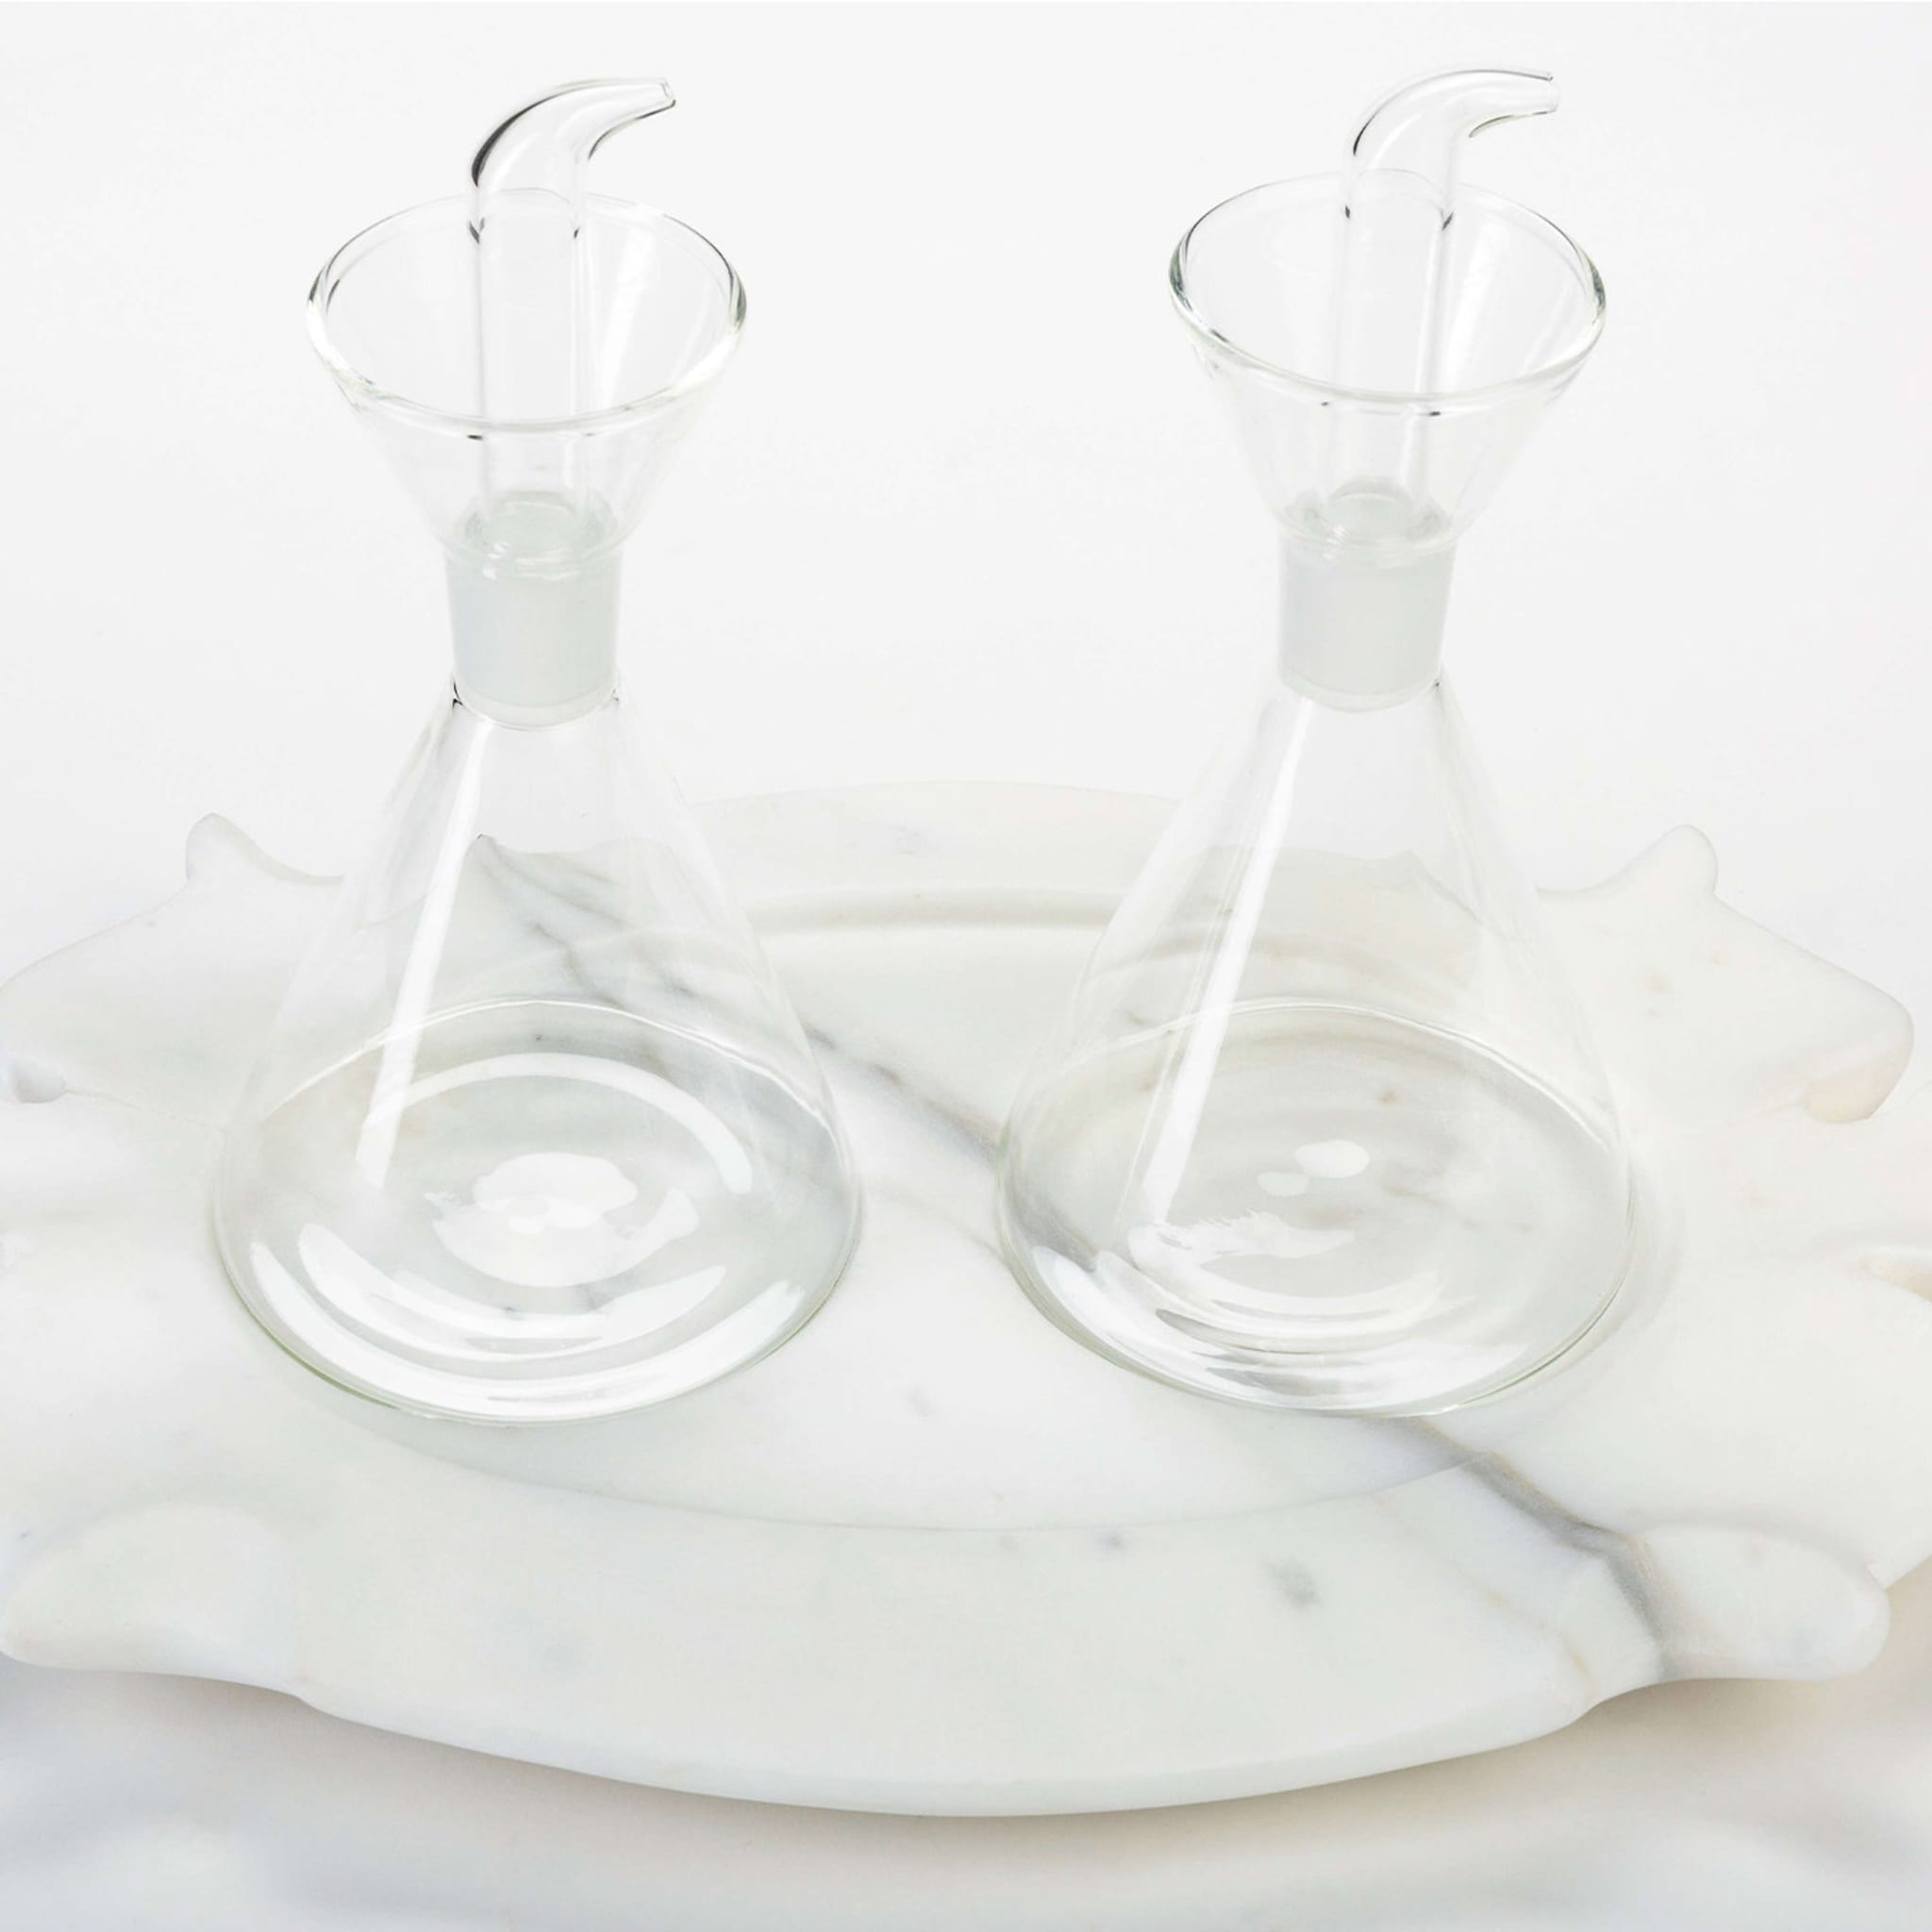 Set of 2 Oil Jugs and Tray - Alternative view 1